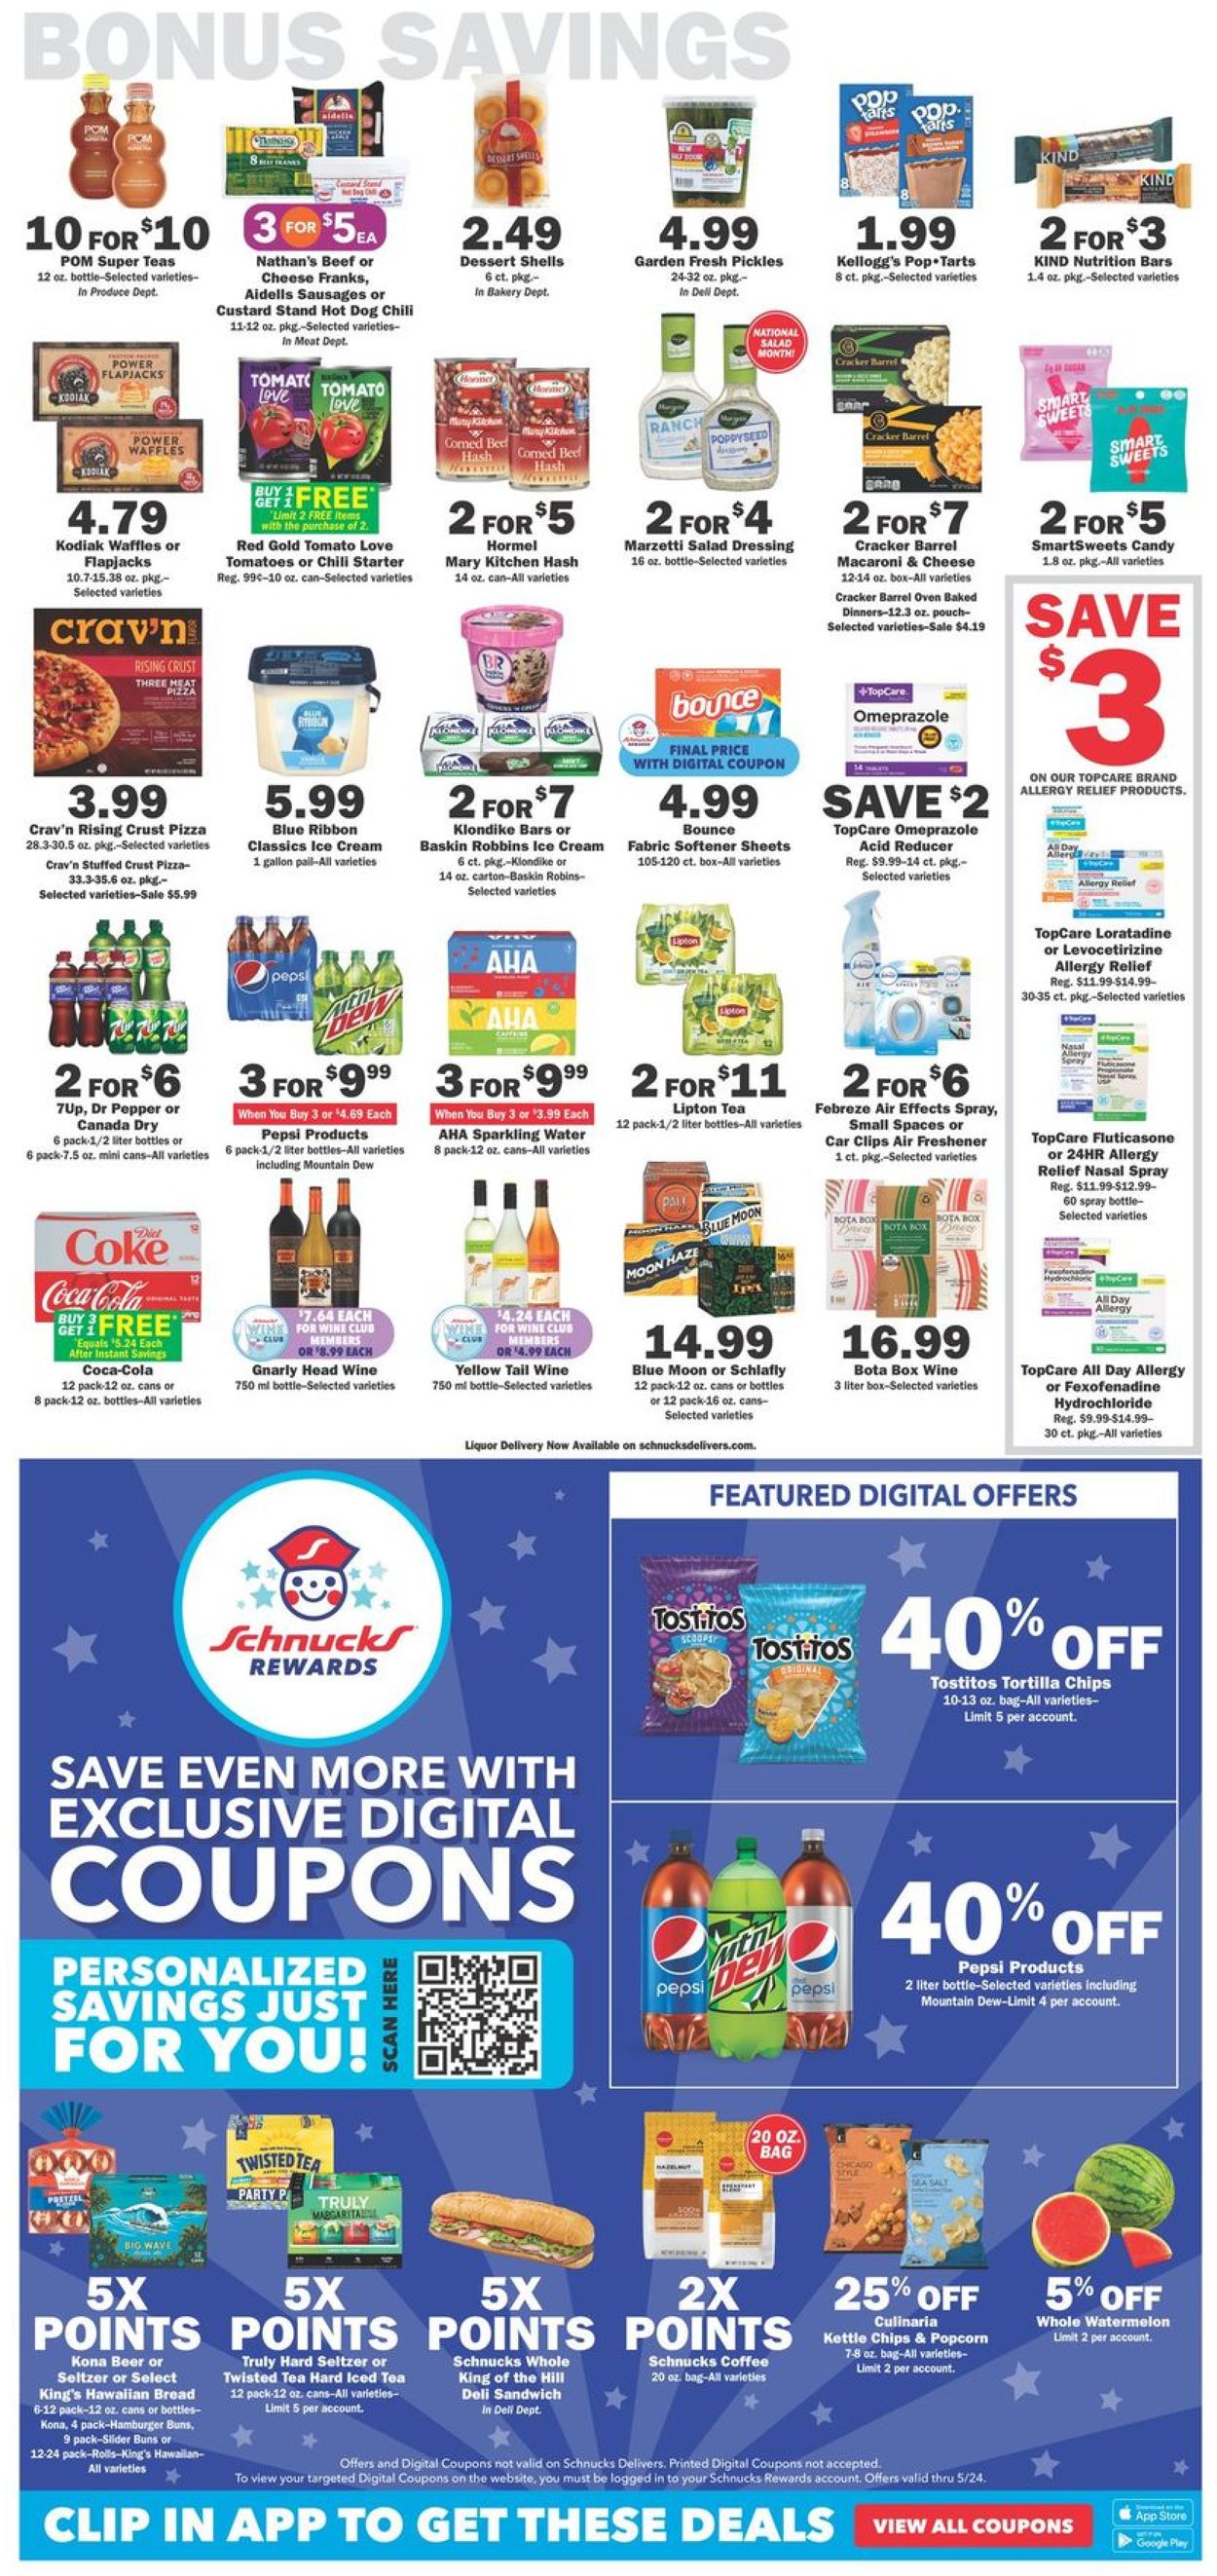 Schnucks Current weekly ad 05/18 - 05/24/2022 [5] - frequent-ads.com